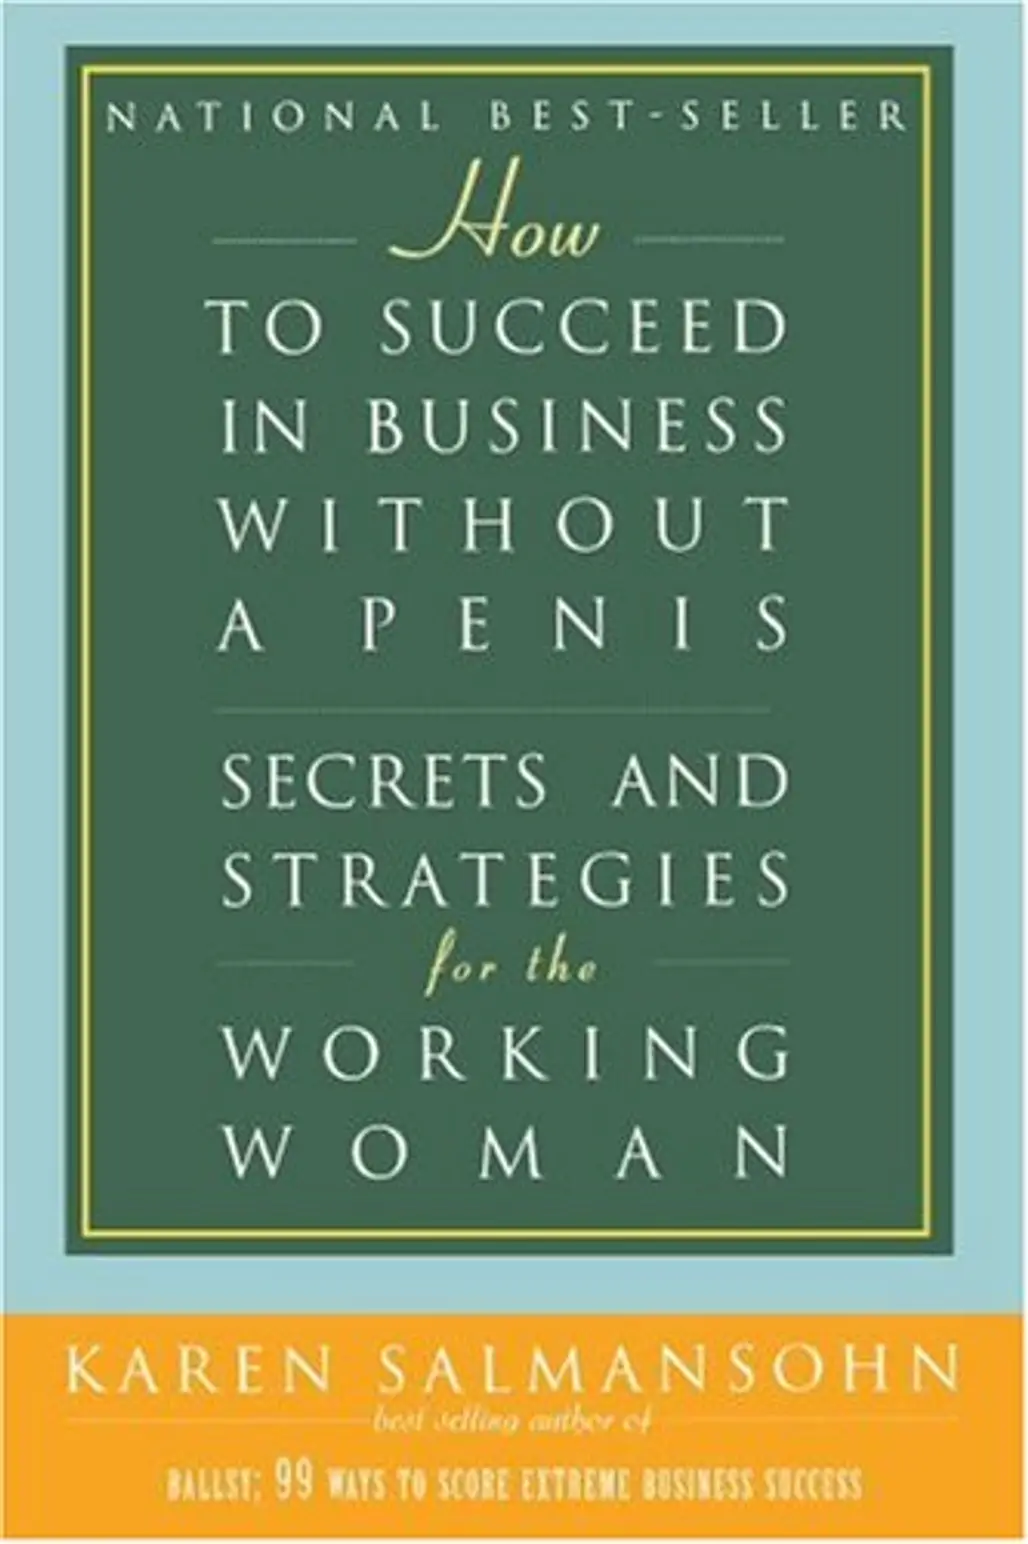 How to Succeed in Business without a Penis: Secrets and Strategies for the Working Woman by Karen Salmonsohn